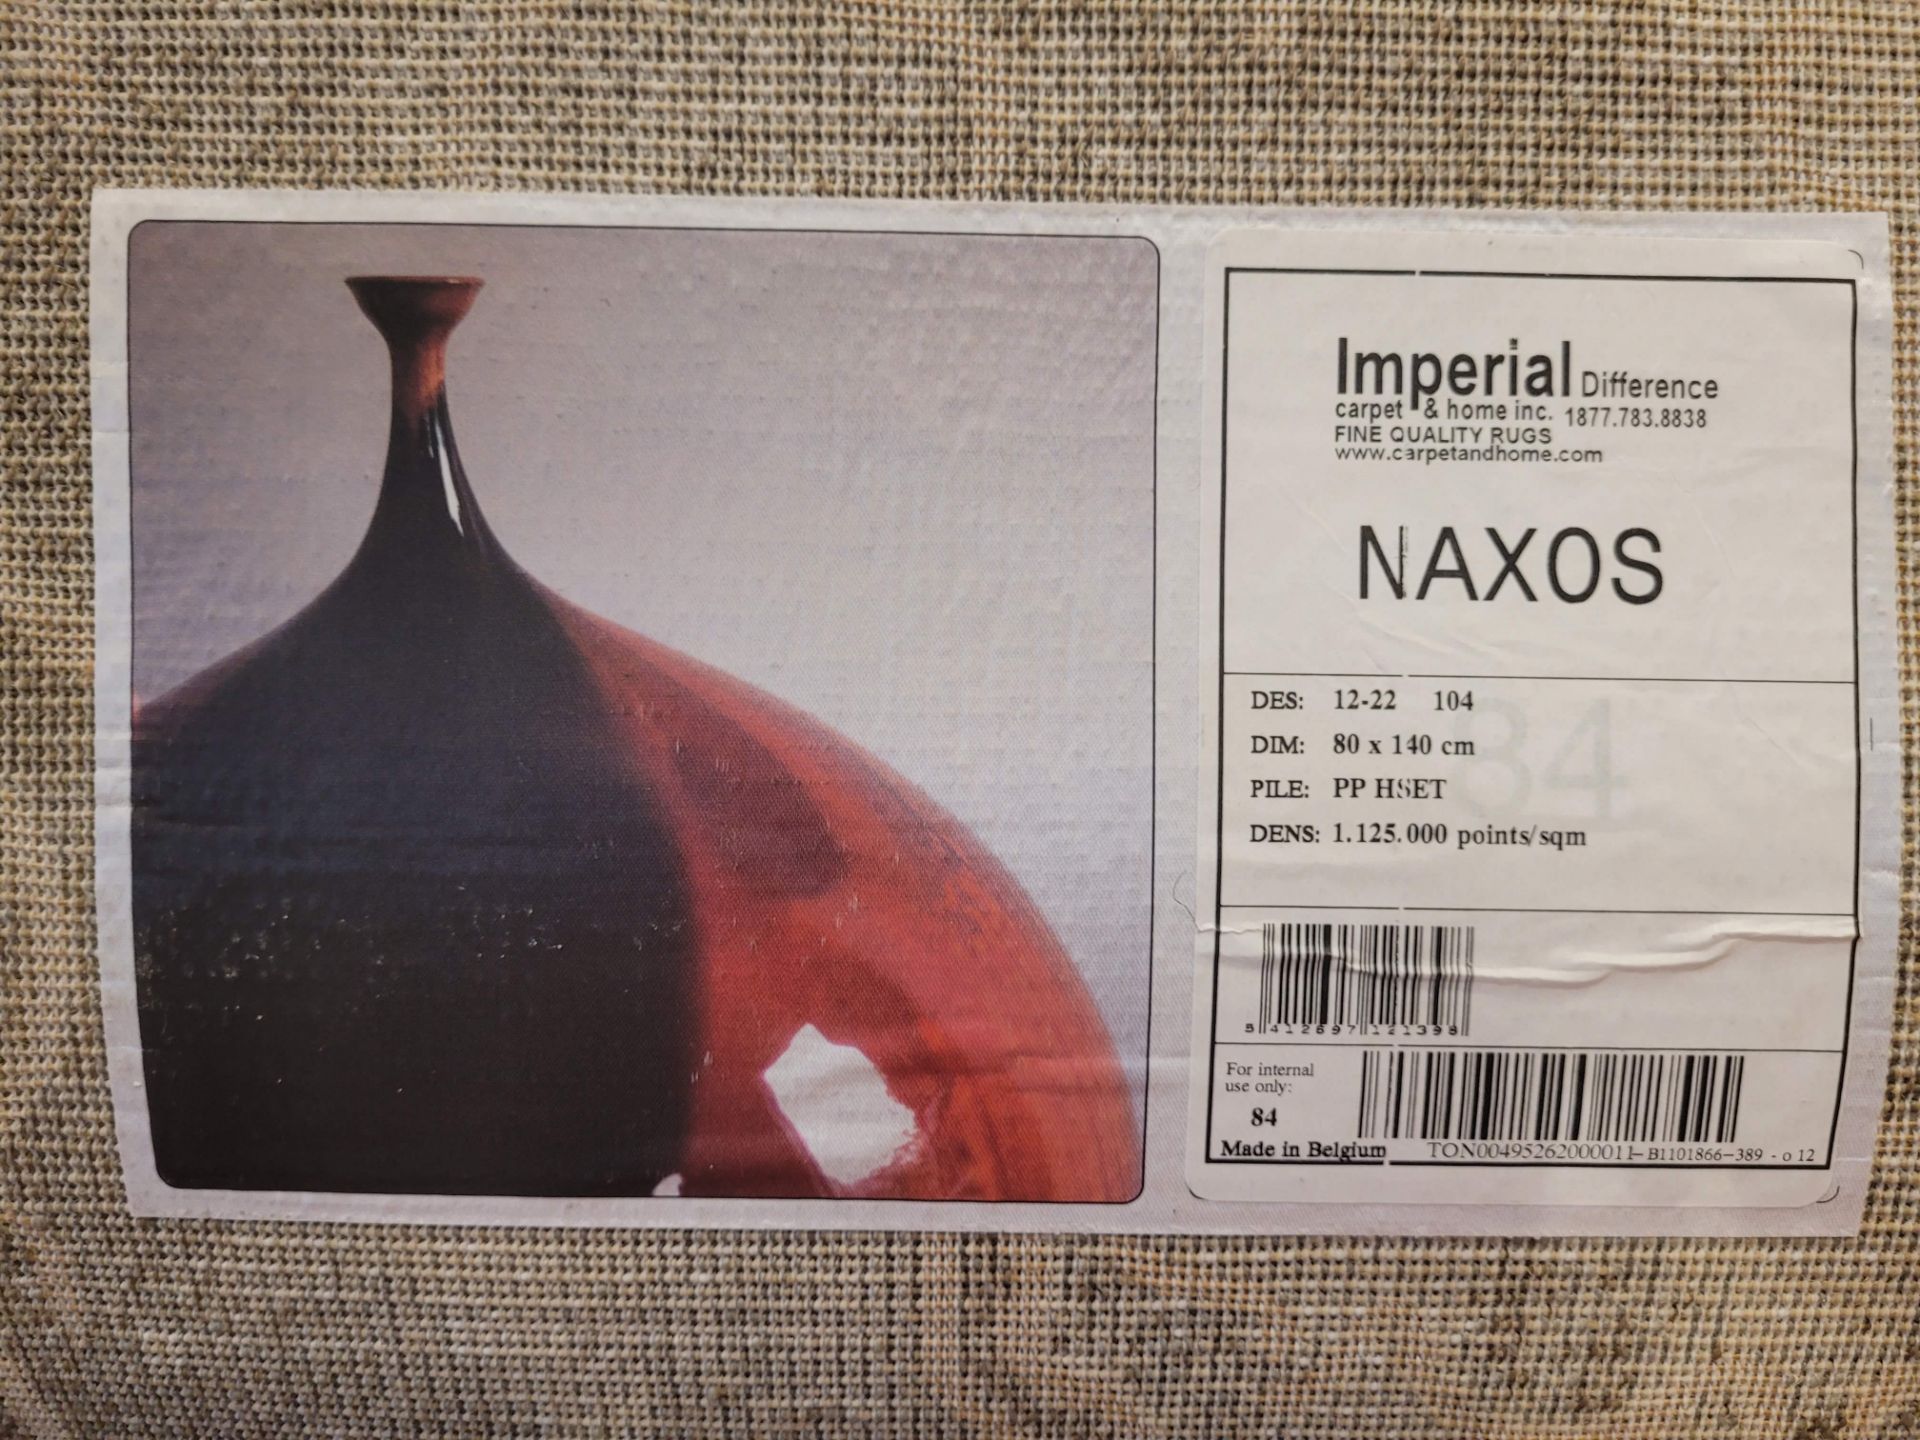 2'5" X 4'5" NAXOS MADE IN BELGIUM - MSRP $267.00 EA. (LOCATED IN WALL-TO-WALL) INVENTORY CODE: 12-22 - Image 3 of 3